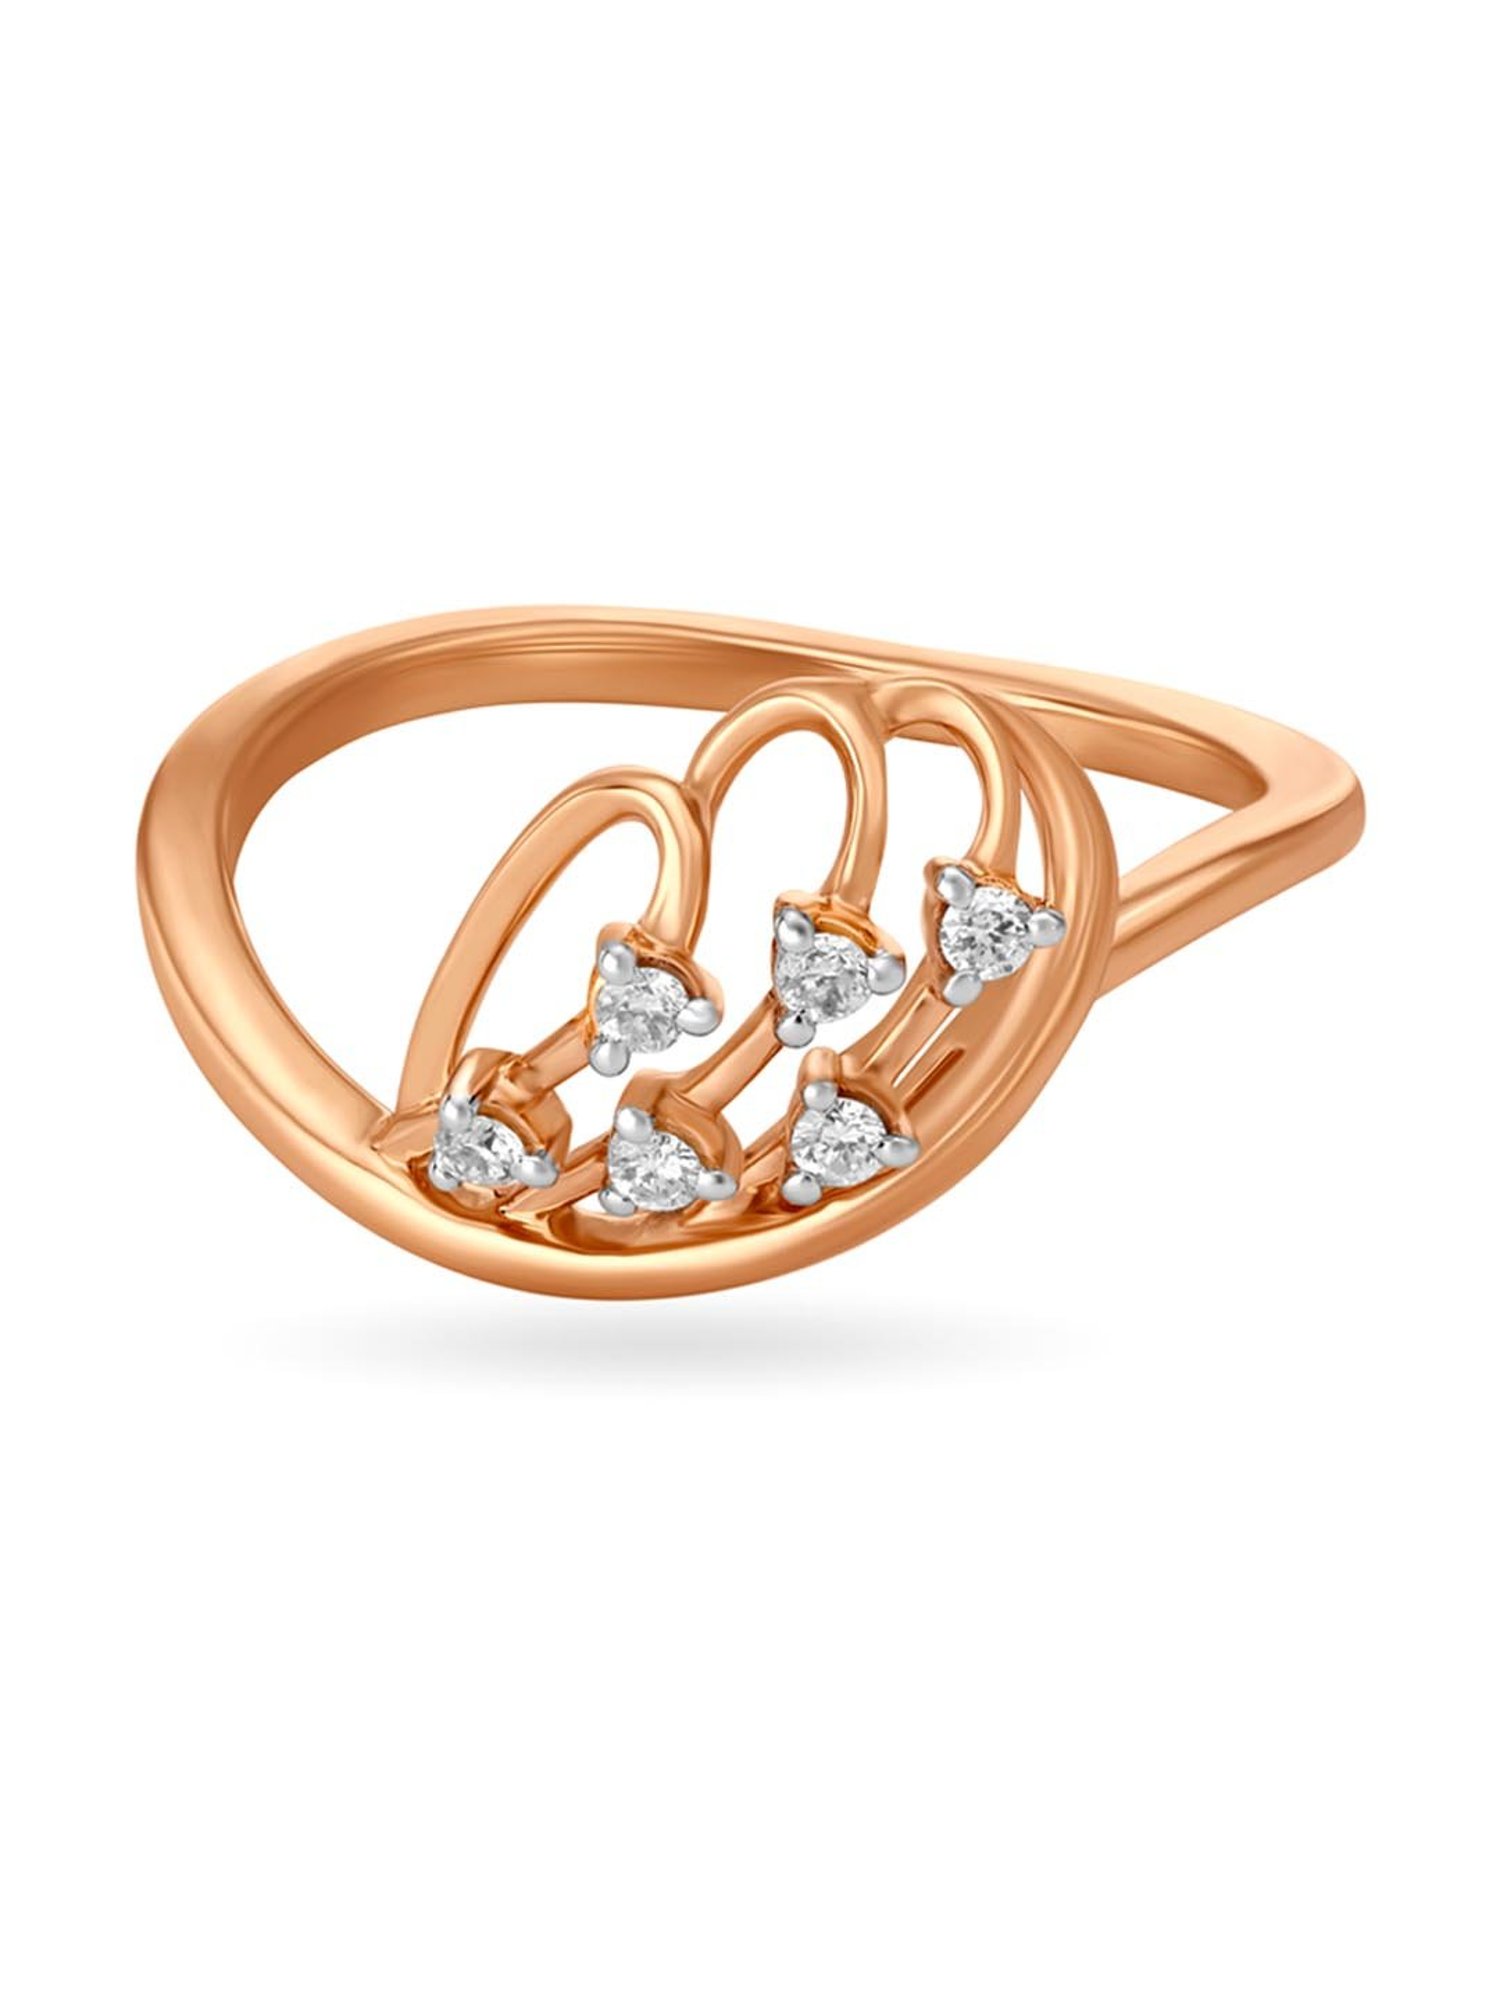 Couple Rings - 560 Latest Couple Rings Designs @ Rs 3293